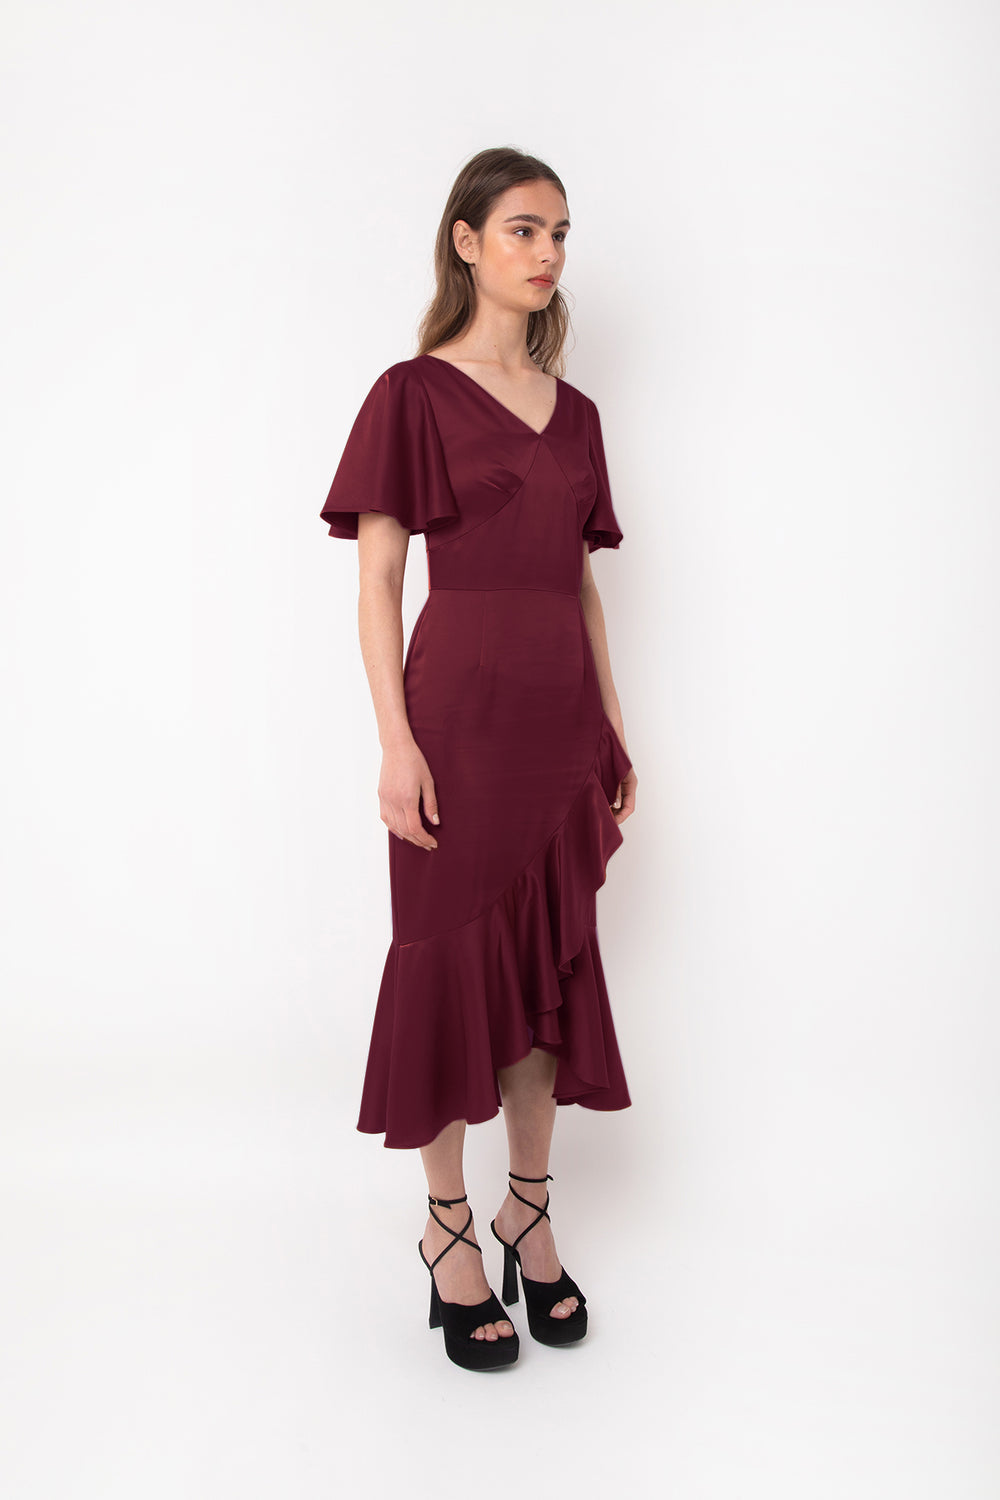 AMYLYNN Dresses | Shop for every occasion – Page 2